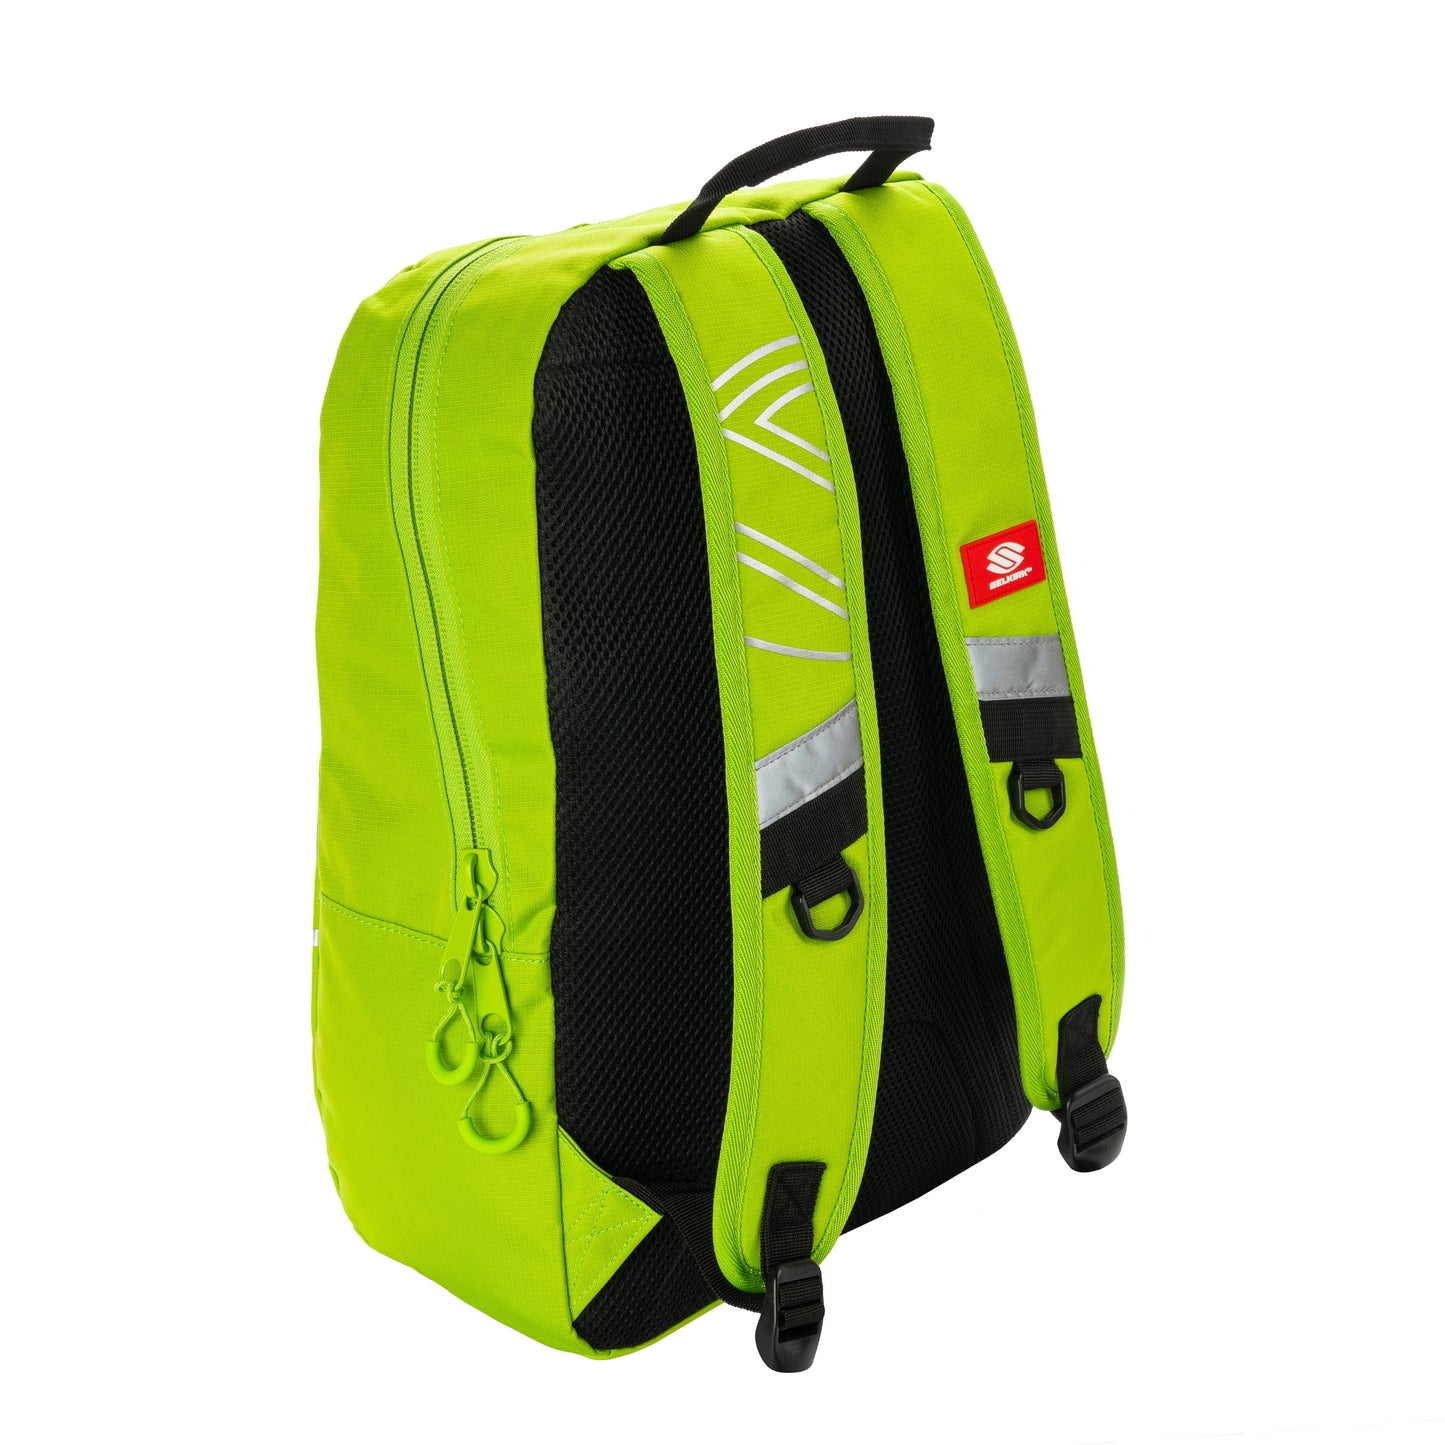 A Selkirk Core Series Day Backpack Pickleball Bag with reflective straps on it.